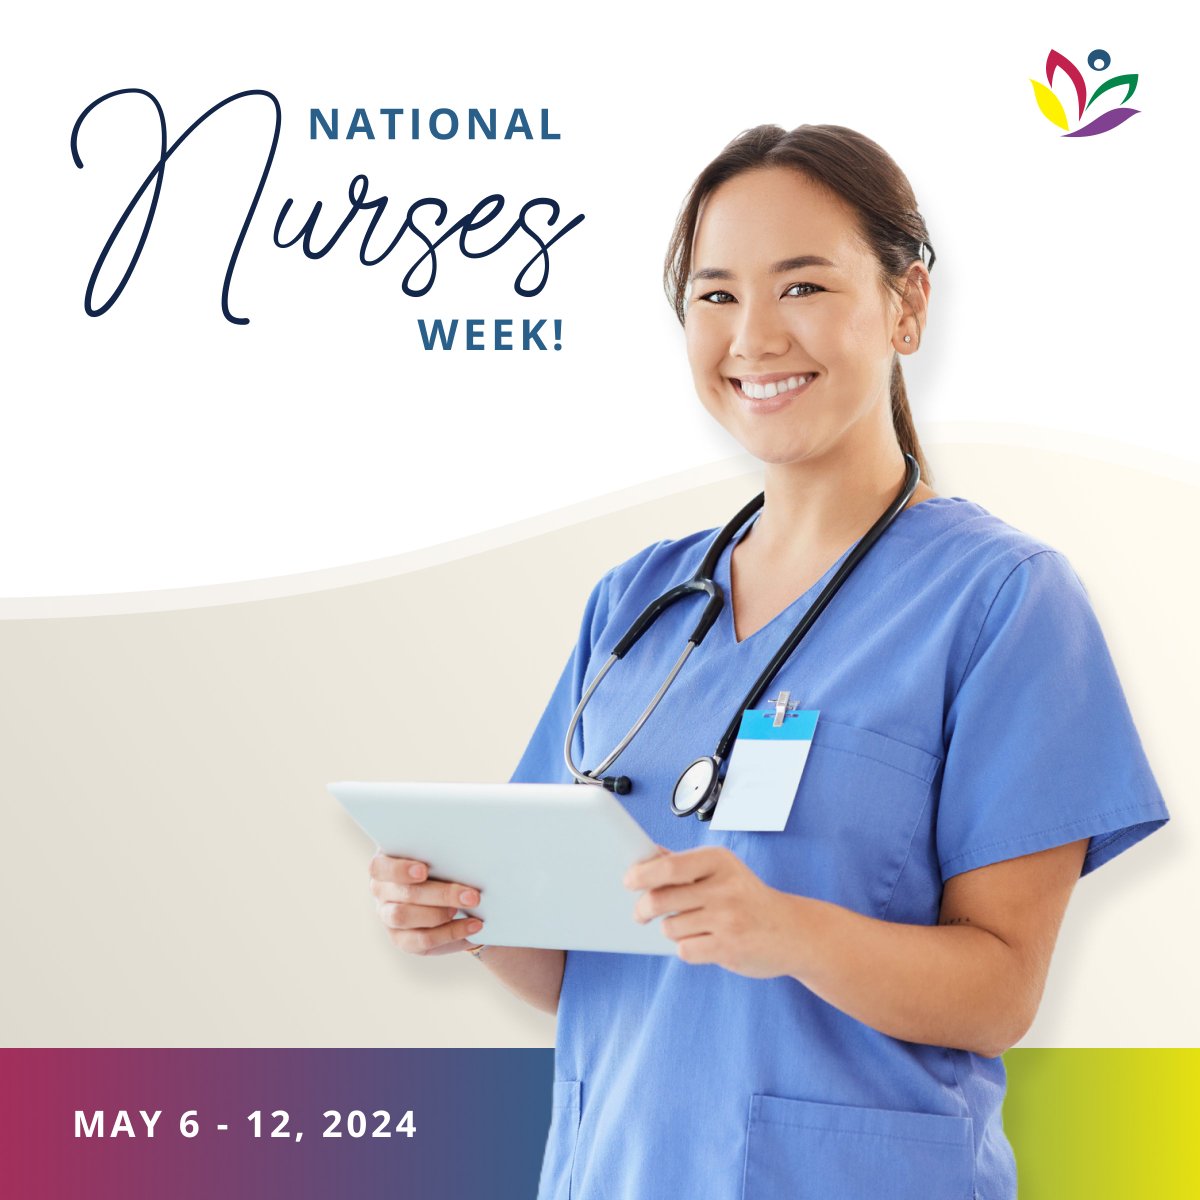 🎉 Cheers to the fertility nurses making a difference every day! Your compassionate care and support are truly inspiring. Happy National Nurses Week! #NationalNursesWeek #FertilityCare #InfertilitySupport #VFPPharmacy